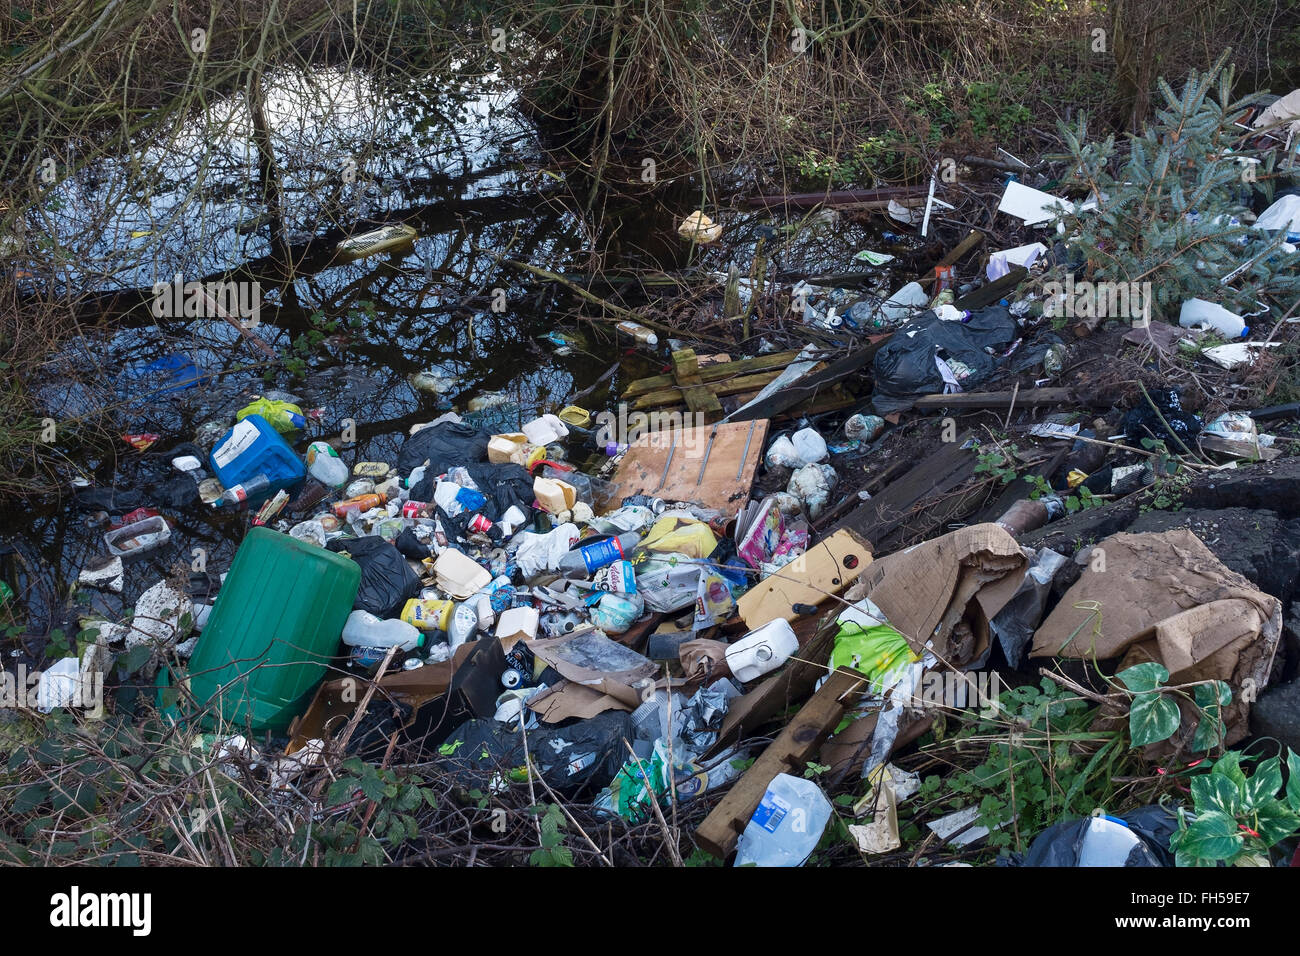 Fly tipping rubbish dumped in the countryside Stock Photo